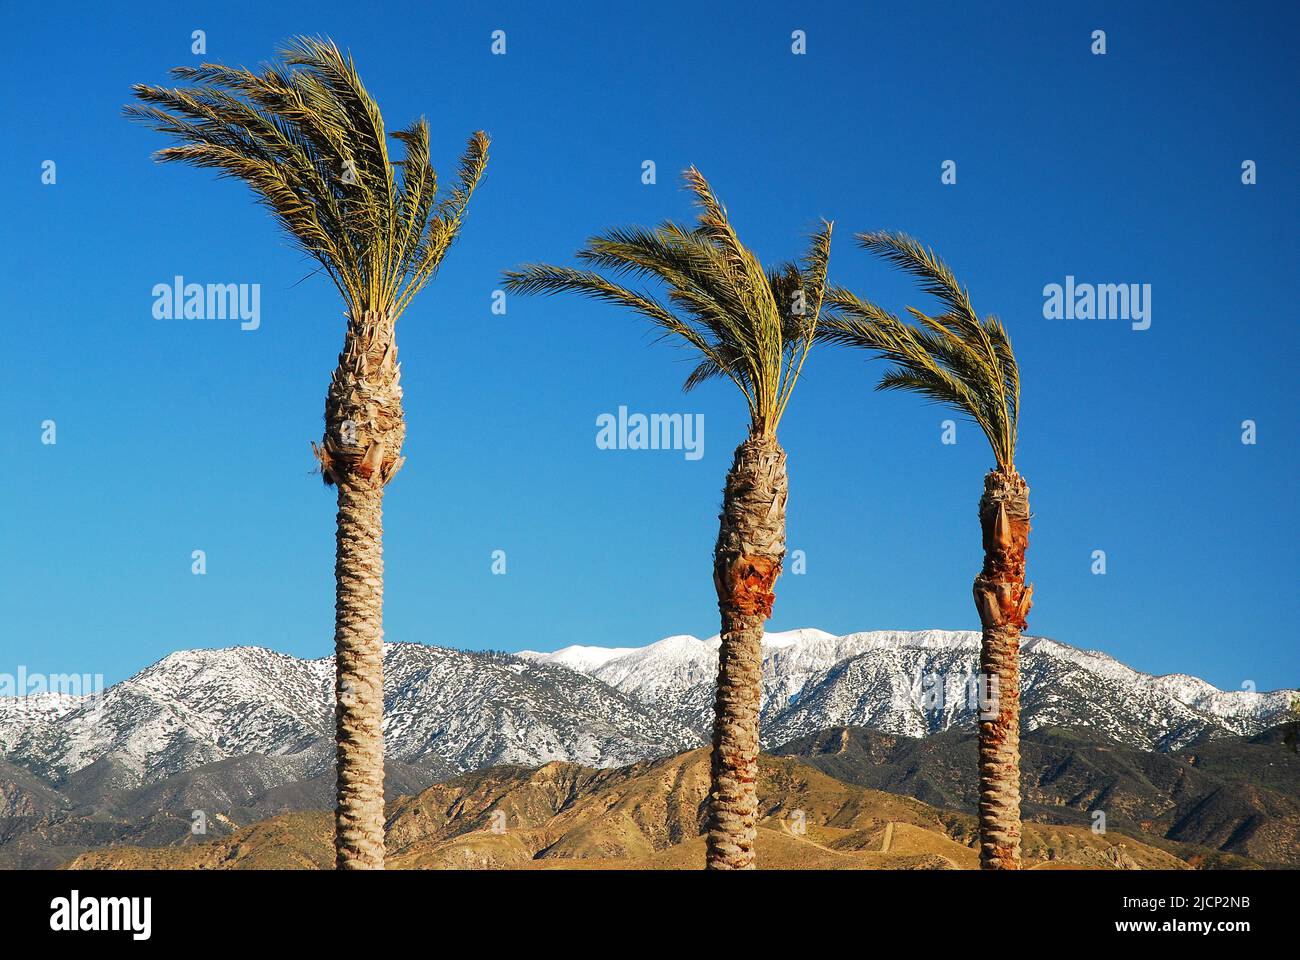 Palm trees and snow capped mountains produce a contrast in climates and landscapes in the San Bernardino Mountains of Southern California near Cabazon Stock Photo